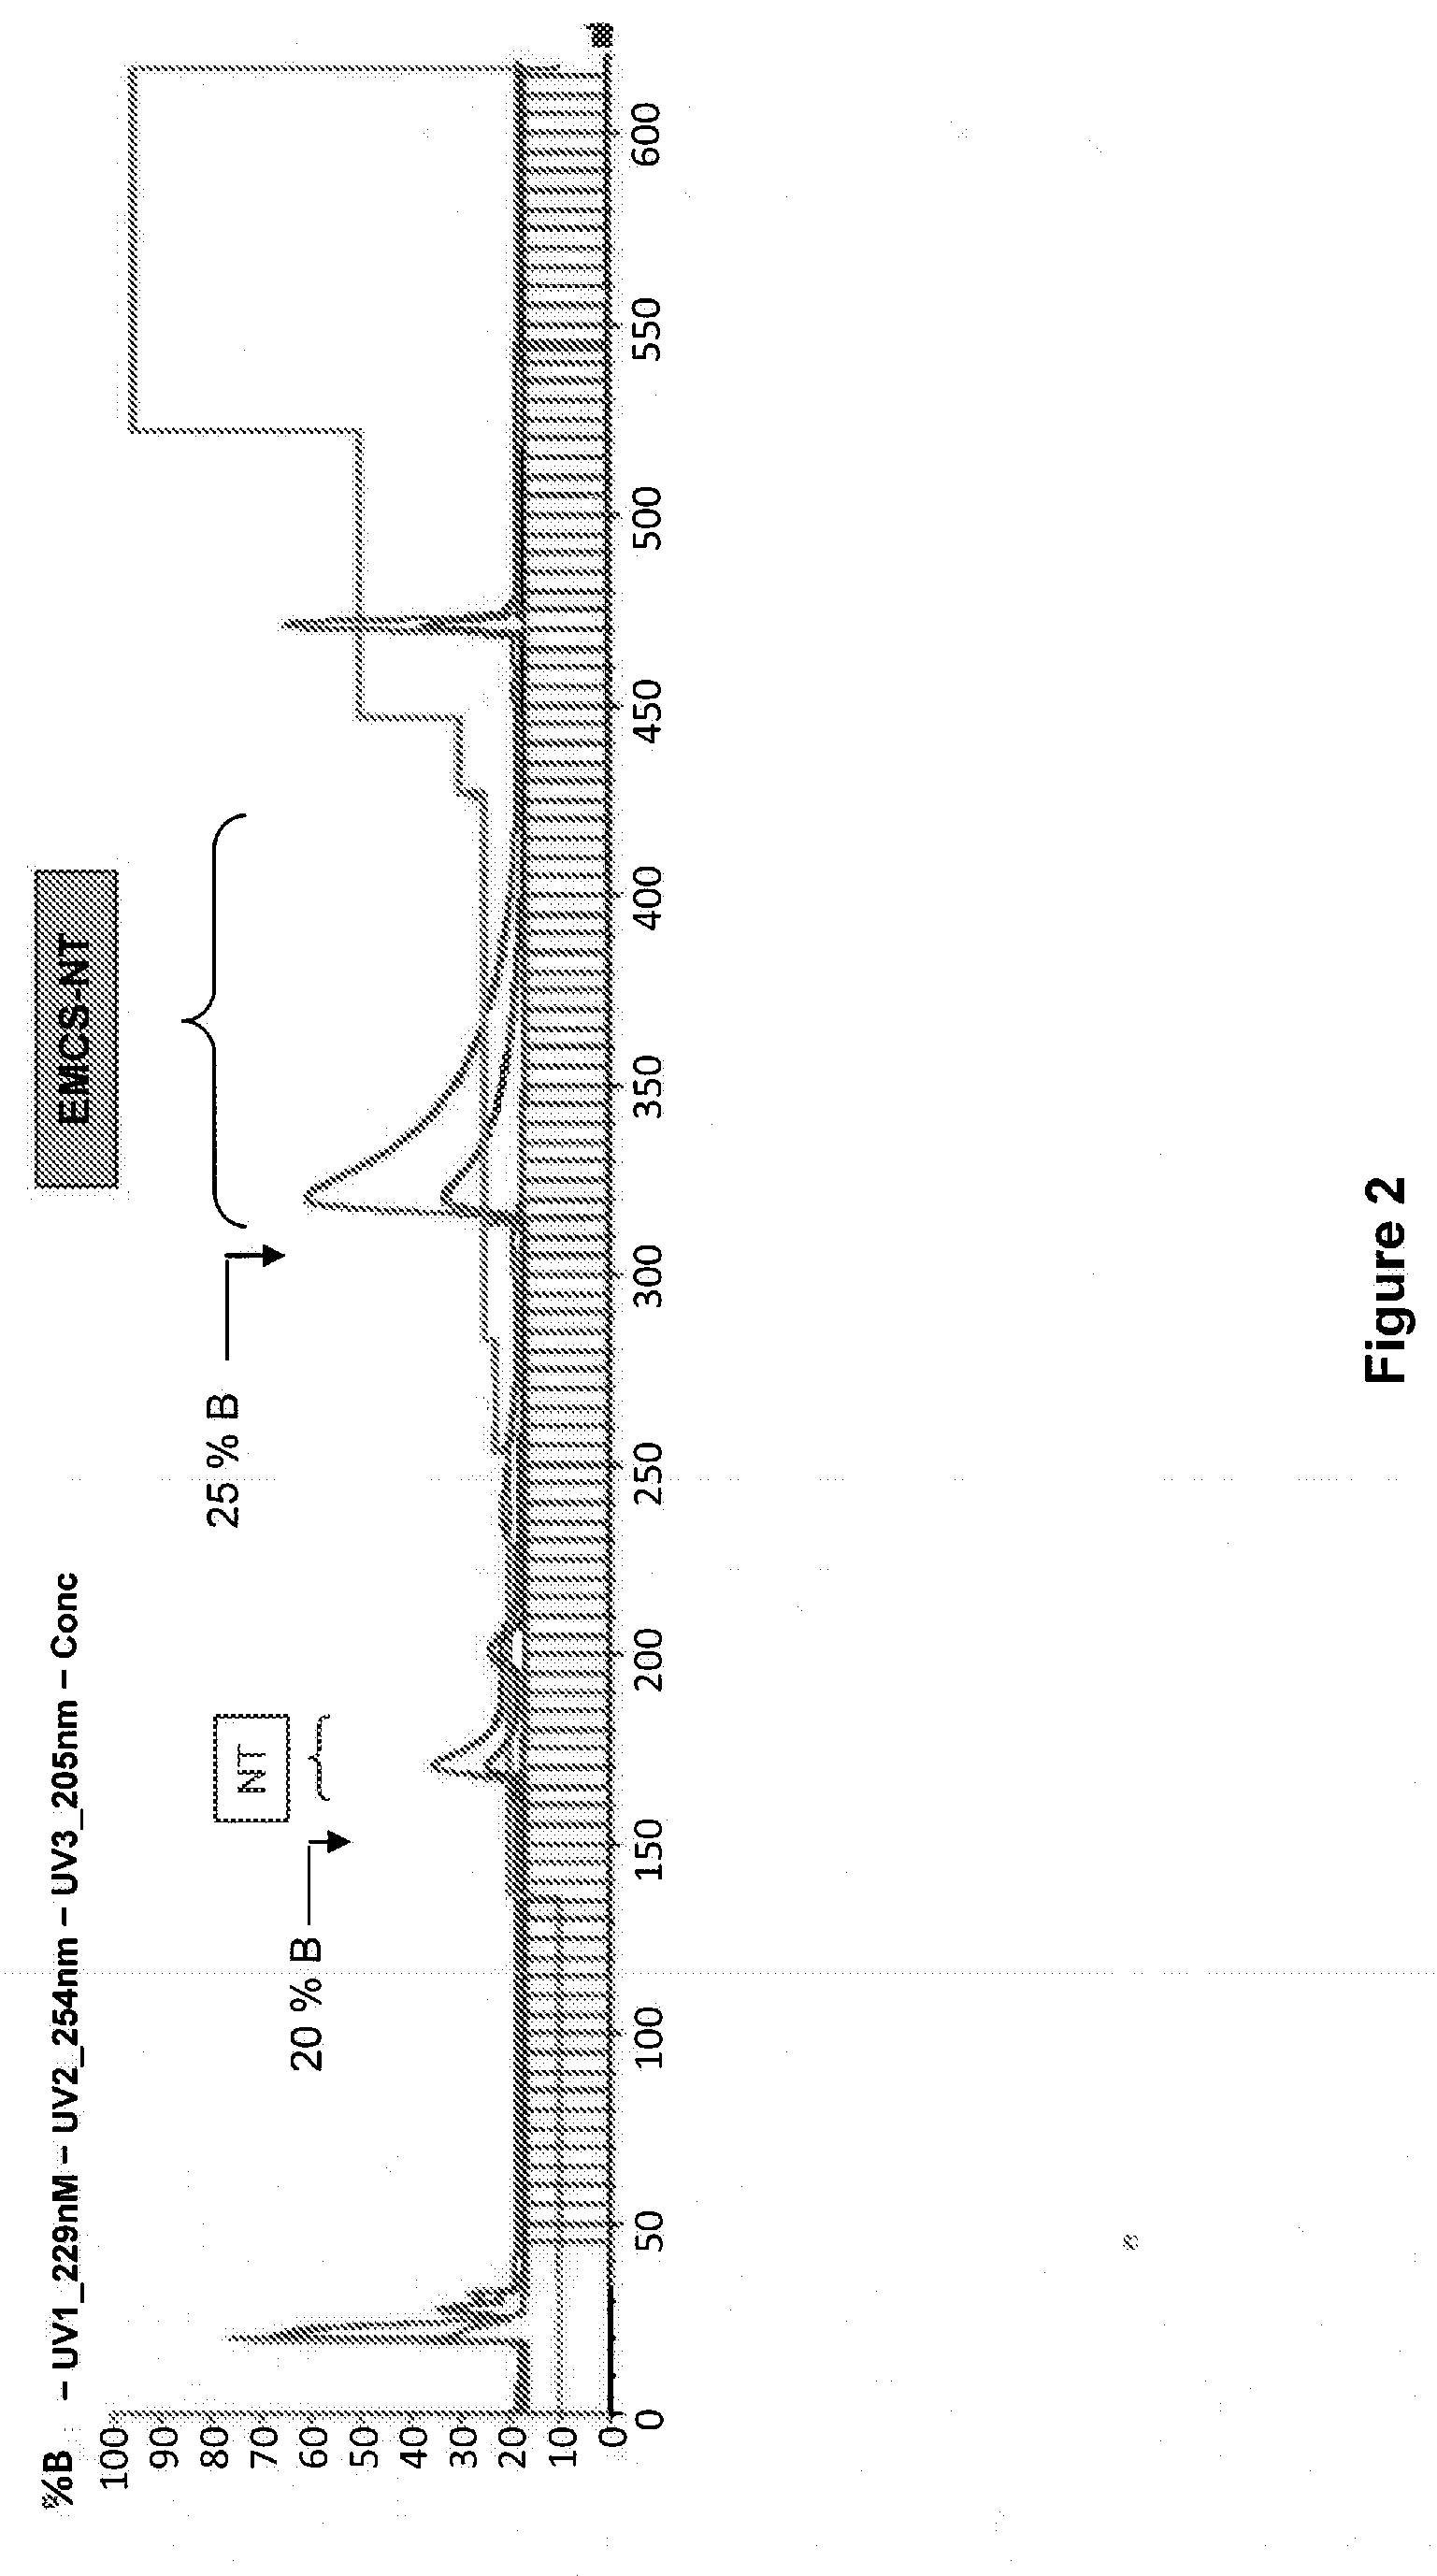 Conjugates of neurotensin or neurotensin analogs and uses thereof